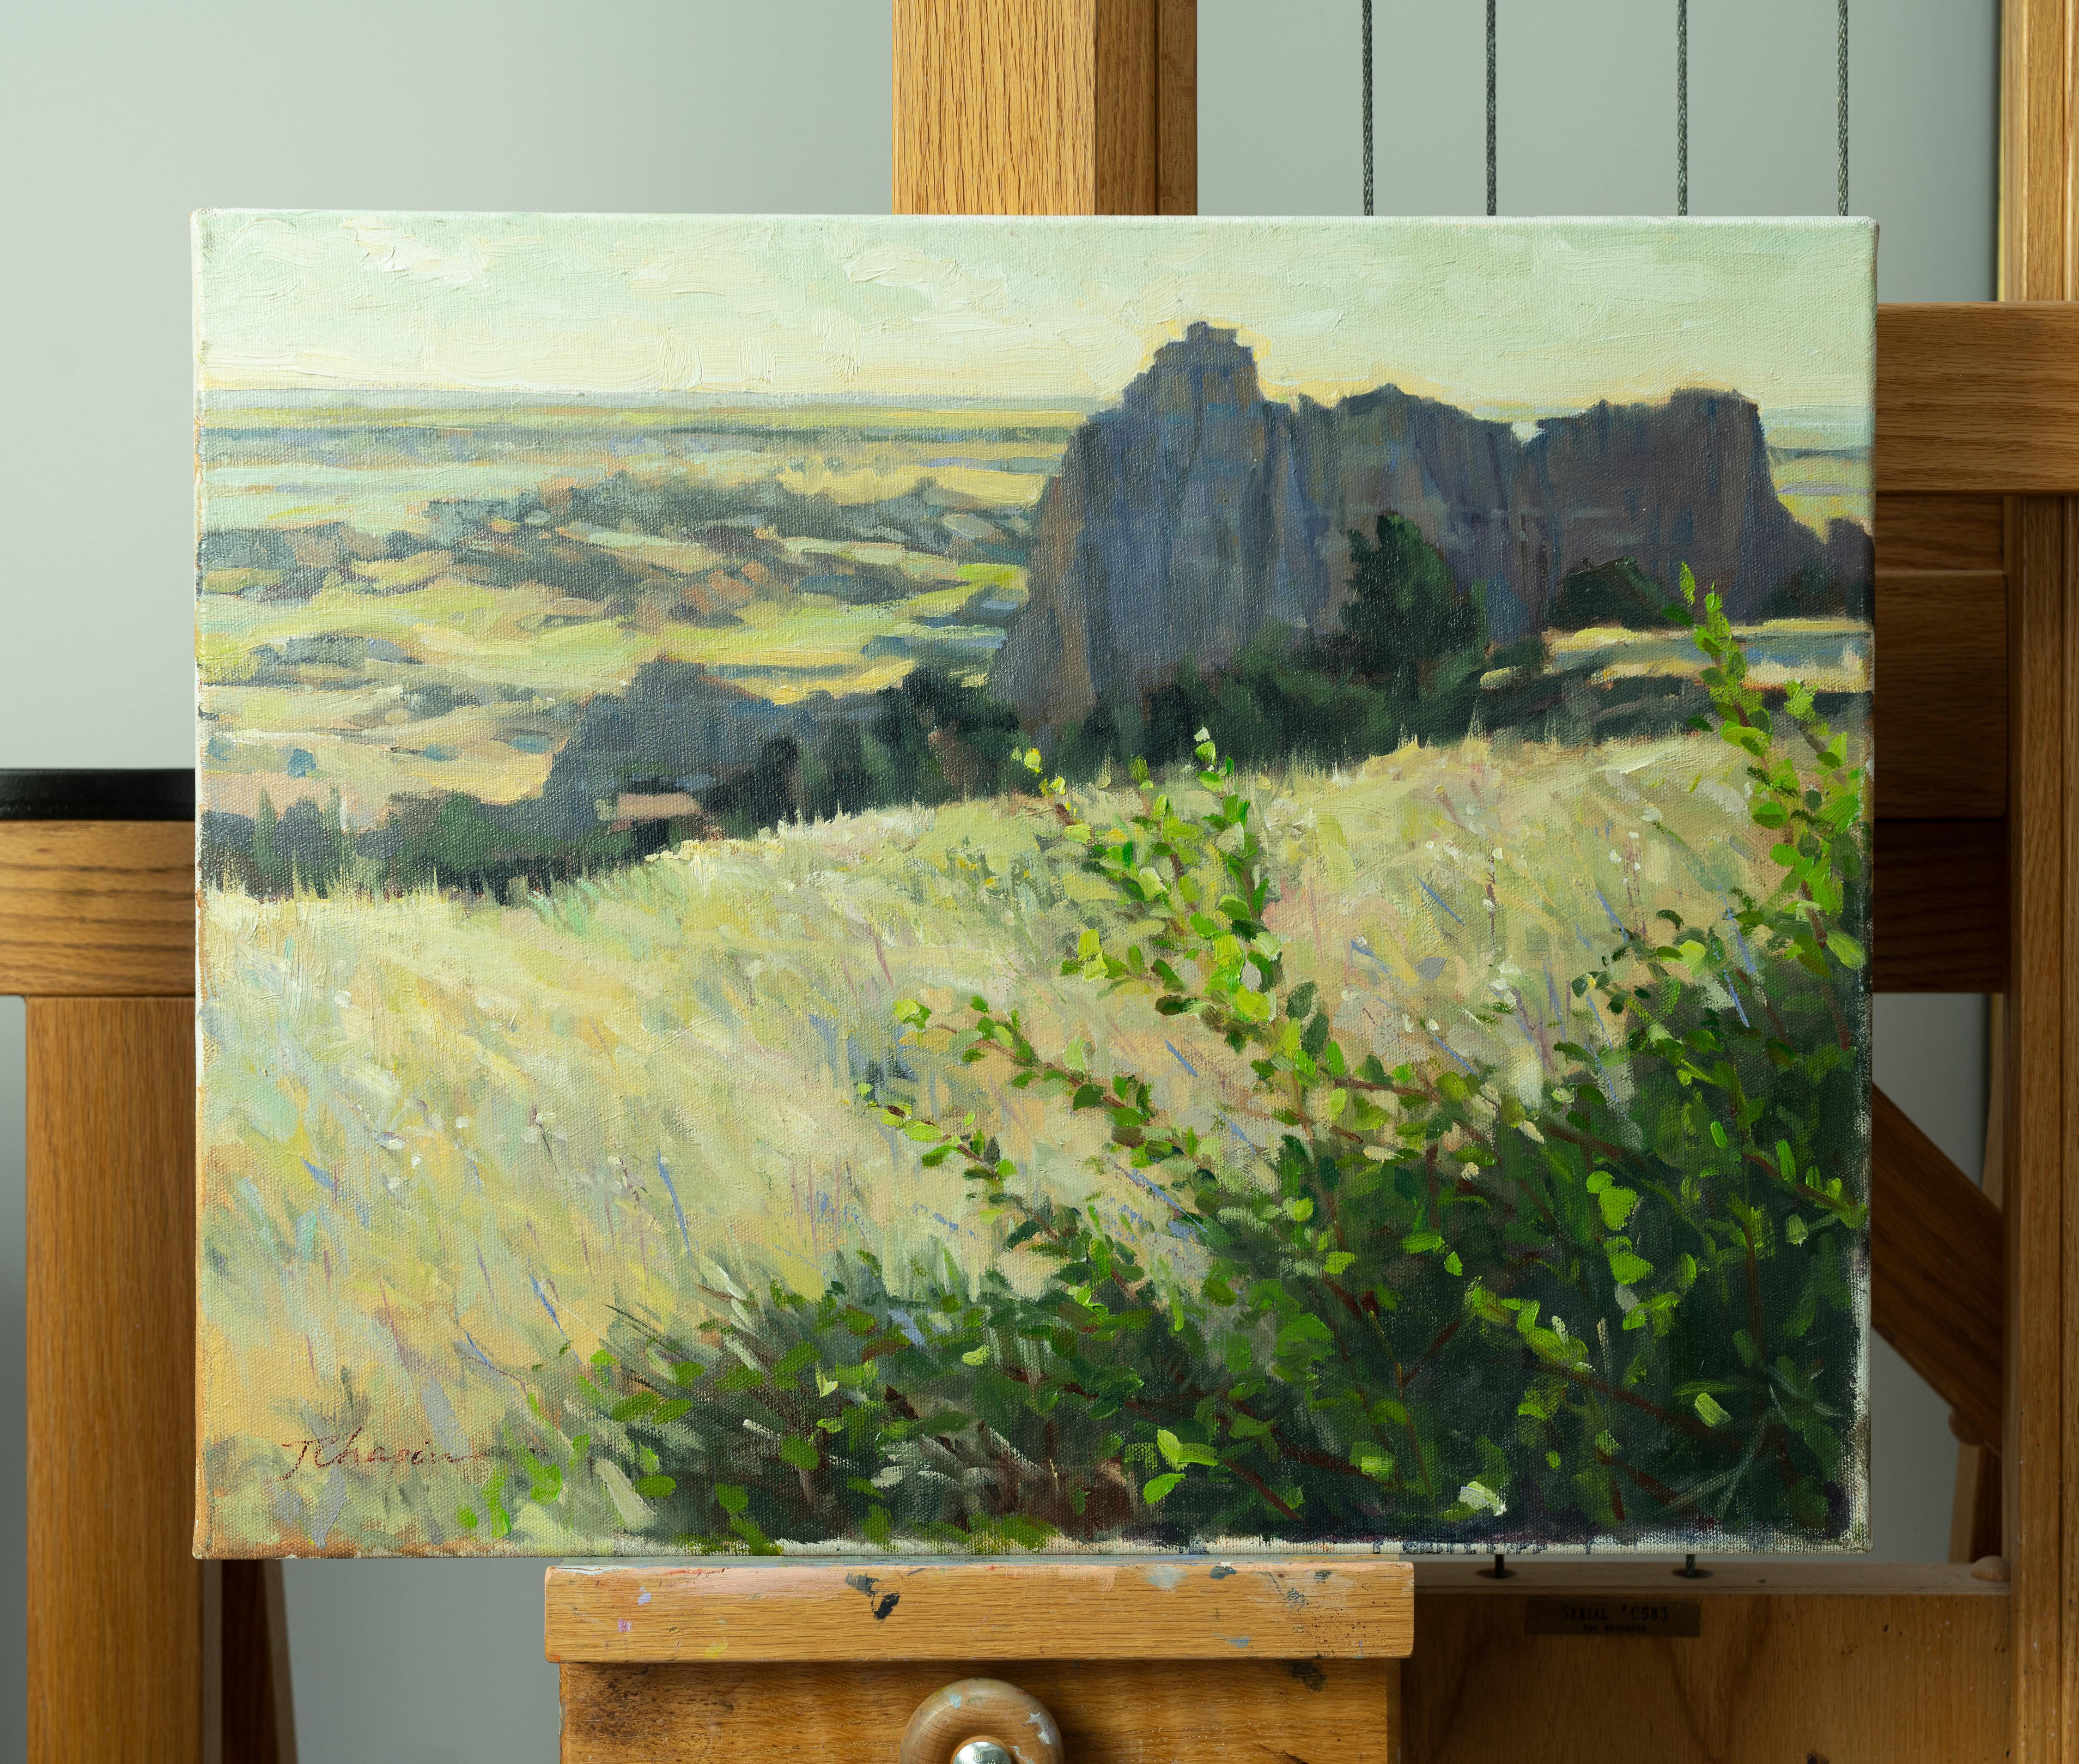 Badlands (South Dakota) - Plein Air Landscape painting green yellow colors - Painting by Jane Chapin